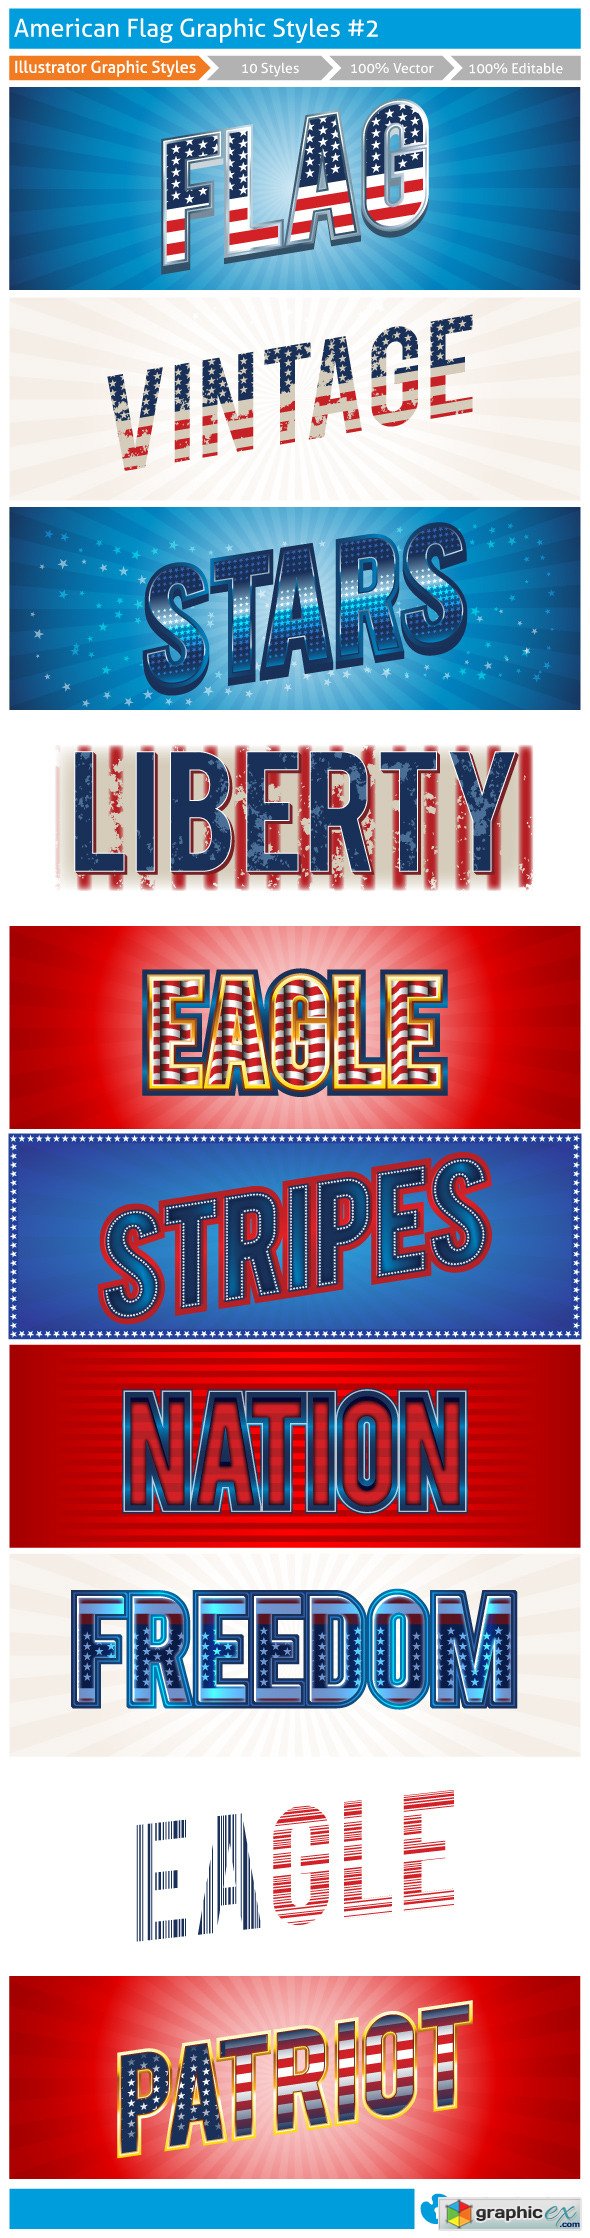 American Graphic Styles 2